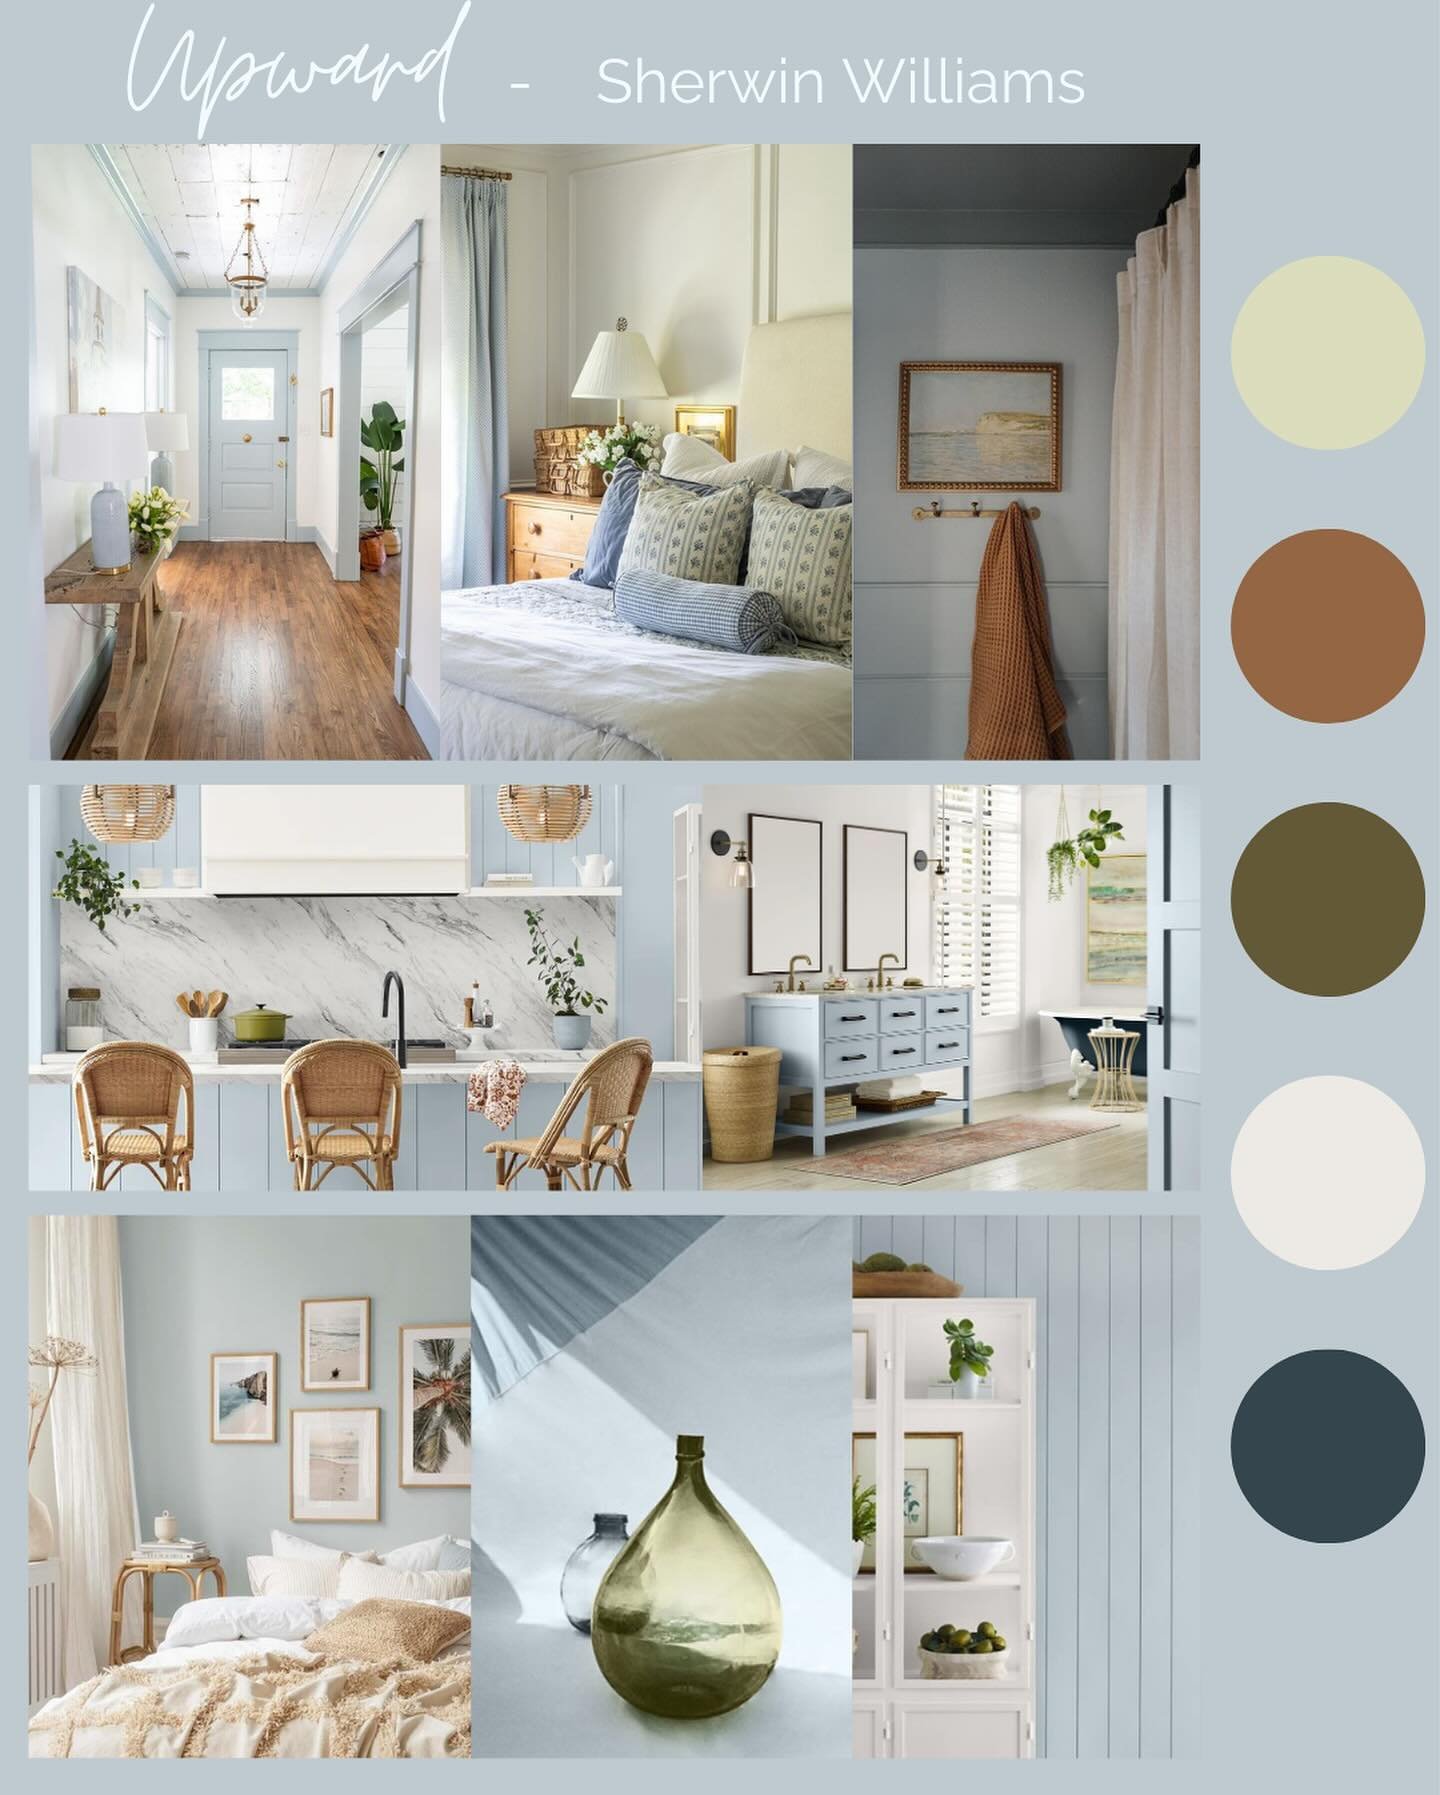 Upward✨
Color of the year by Sherwin Williams! So many fun ways to use this color as show in the pictures. 
For our moodboard we decided to use upward for the walls and paired with browns, greens, blues, and creams!